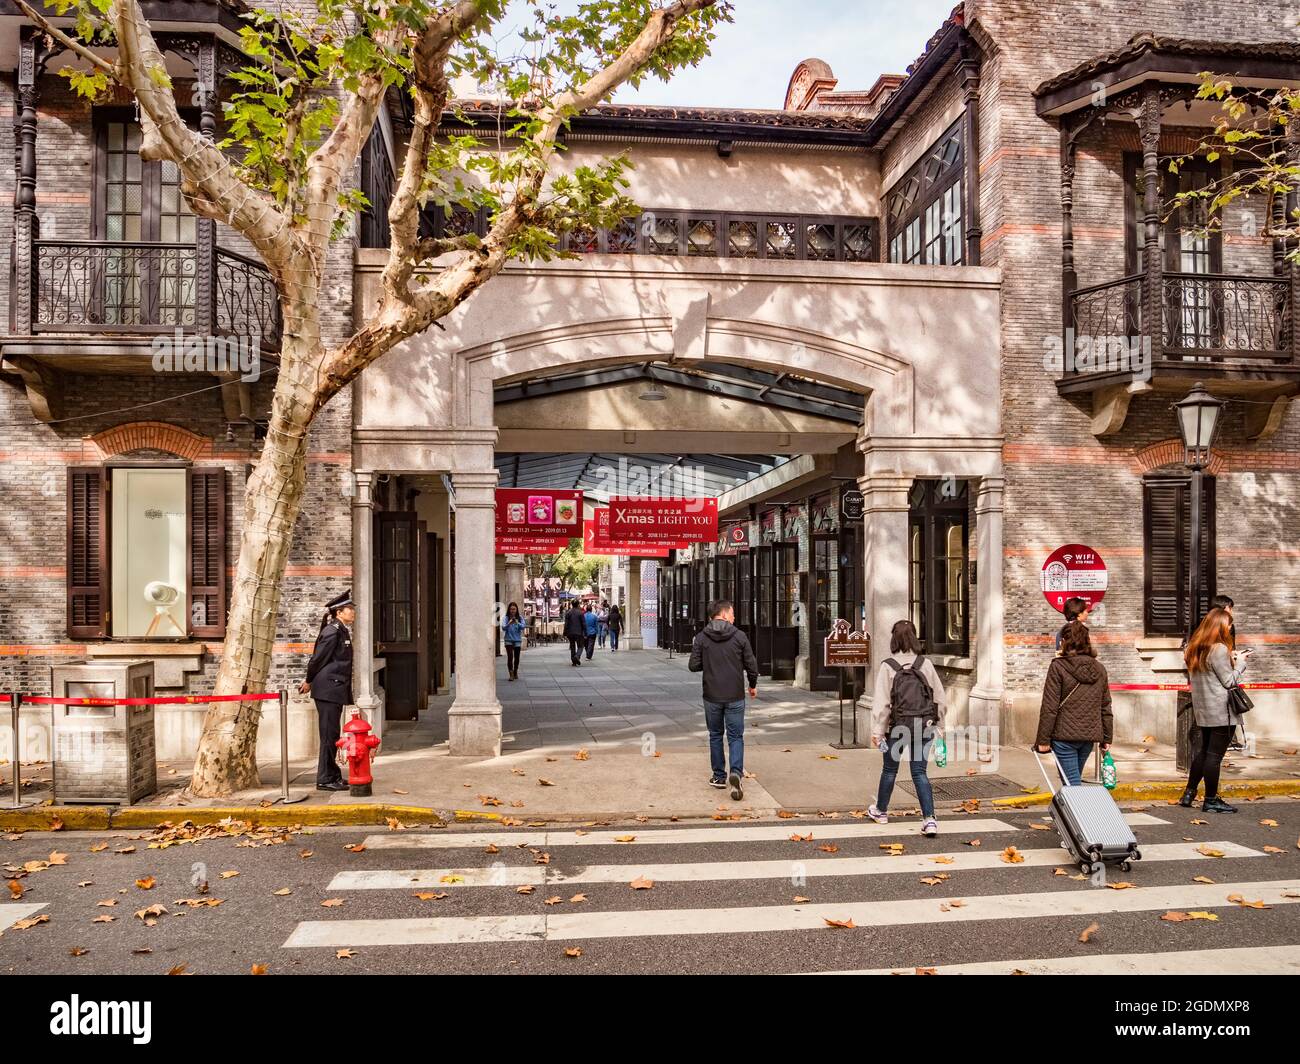 30 November 2018: Shanghai, China - Pedestrian crossing and the entrance to a shopping street in the Xintiandi district of Shanghai, part of the old F Stock Photo